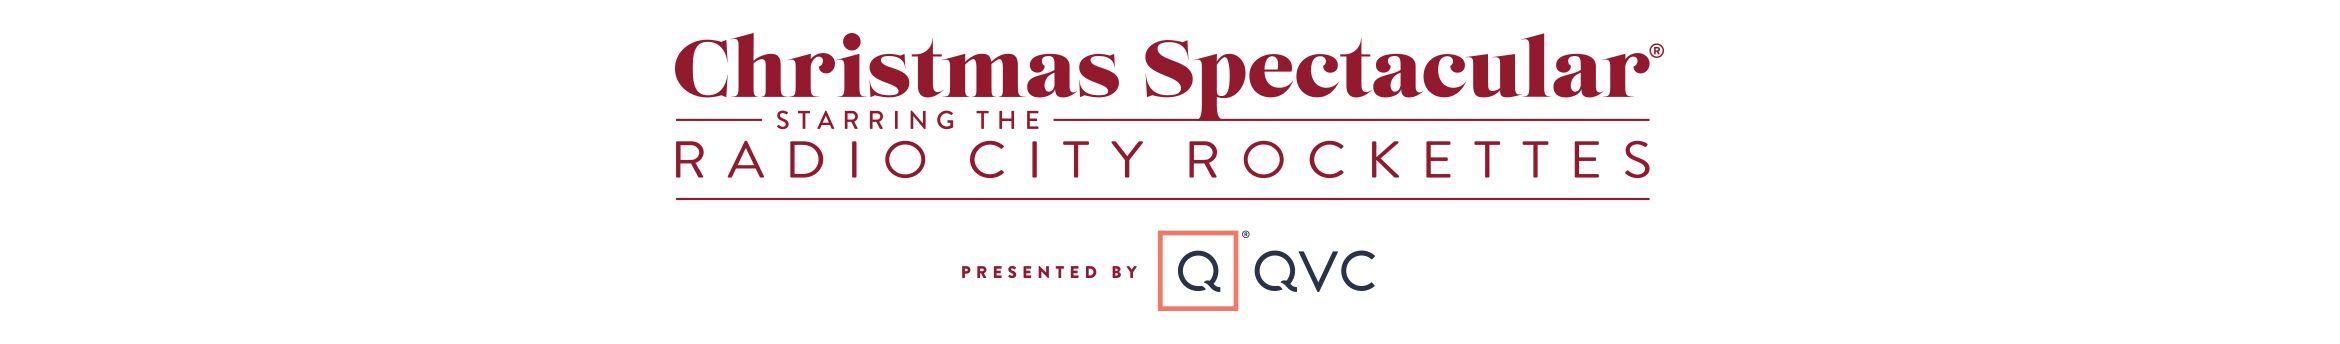 Christmas Spectacular Starring the Radio City Rockettes® Presented By QVC®